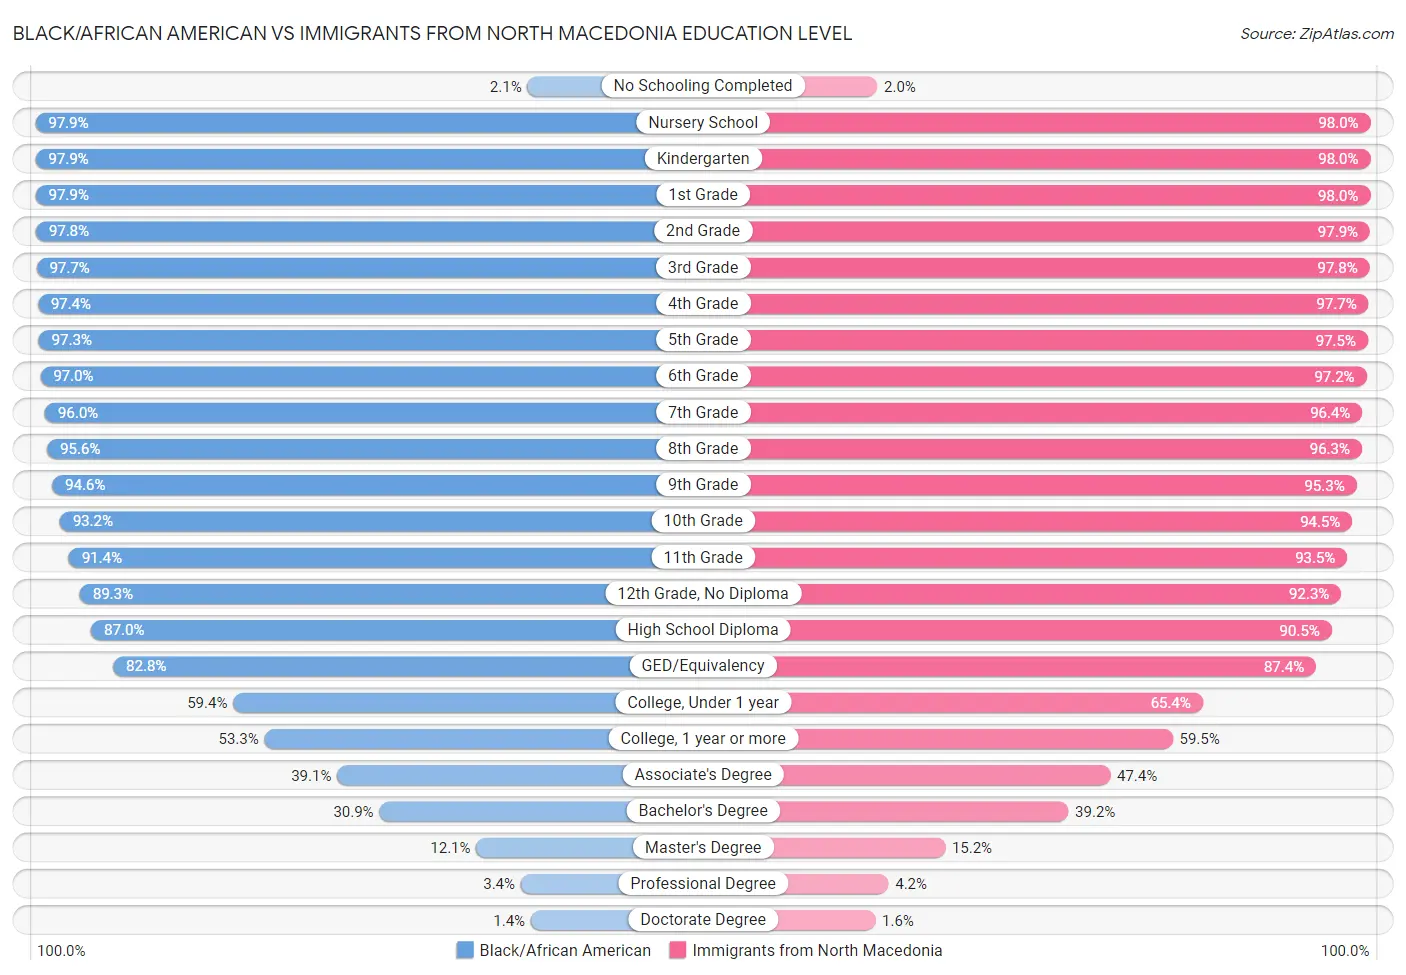 Black/African American vs Immigrants from North Macedonia Education Level